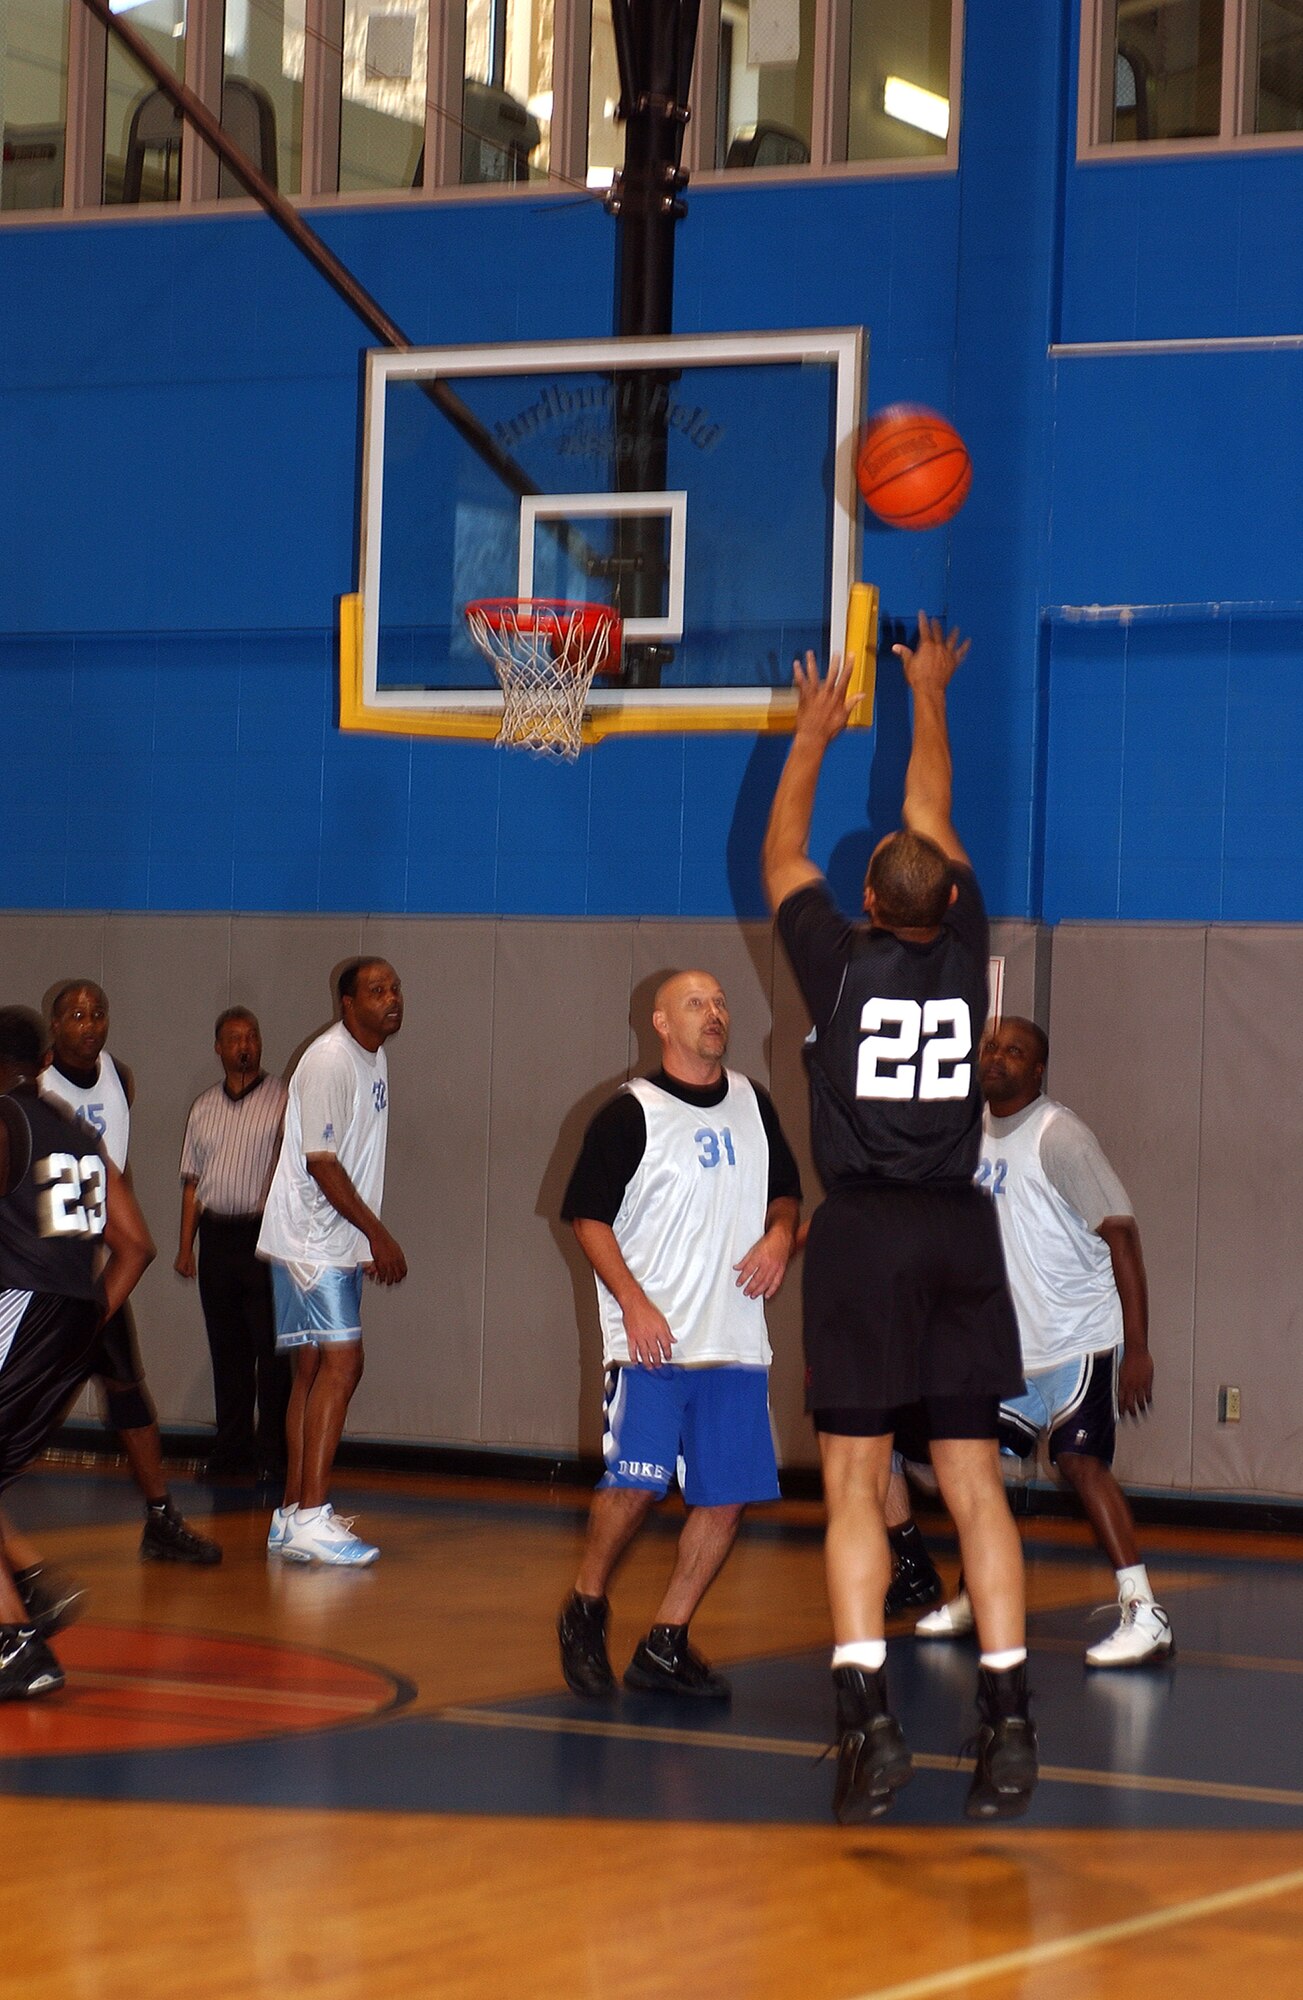 Lynn Lawrence, 16th Medical Group team, shoots, while Richard Johnston (left) and Kenneth Hansford, Air Force Special Operations Command, defend during the over-30 basketball play-off game Tuesday in the Aderholt Fitness Center.